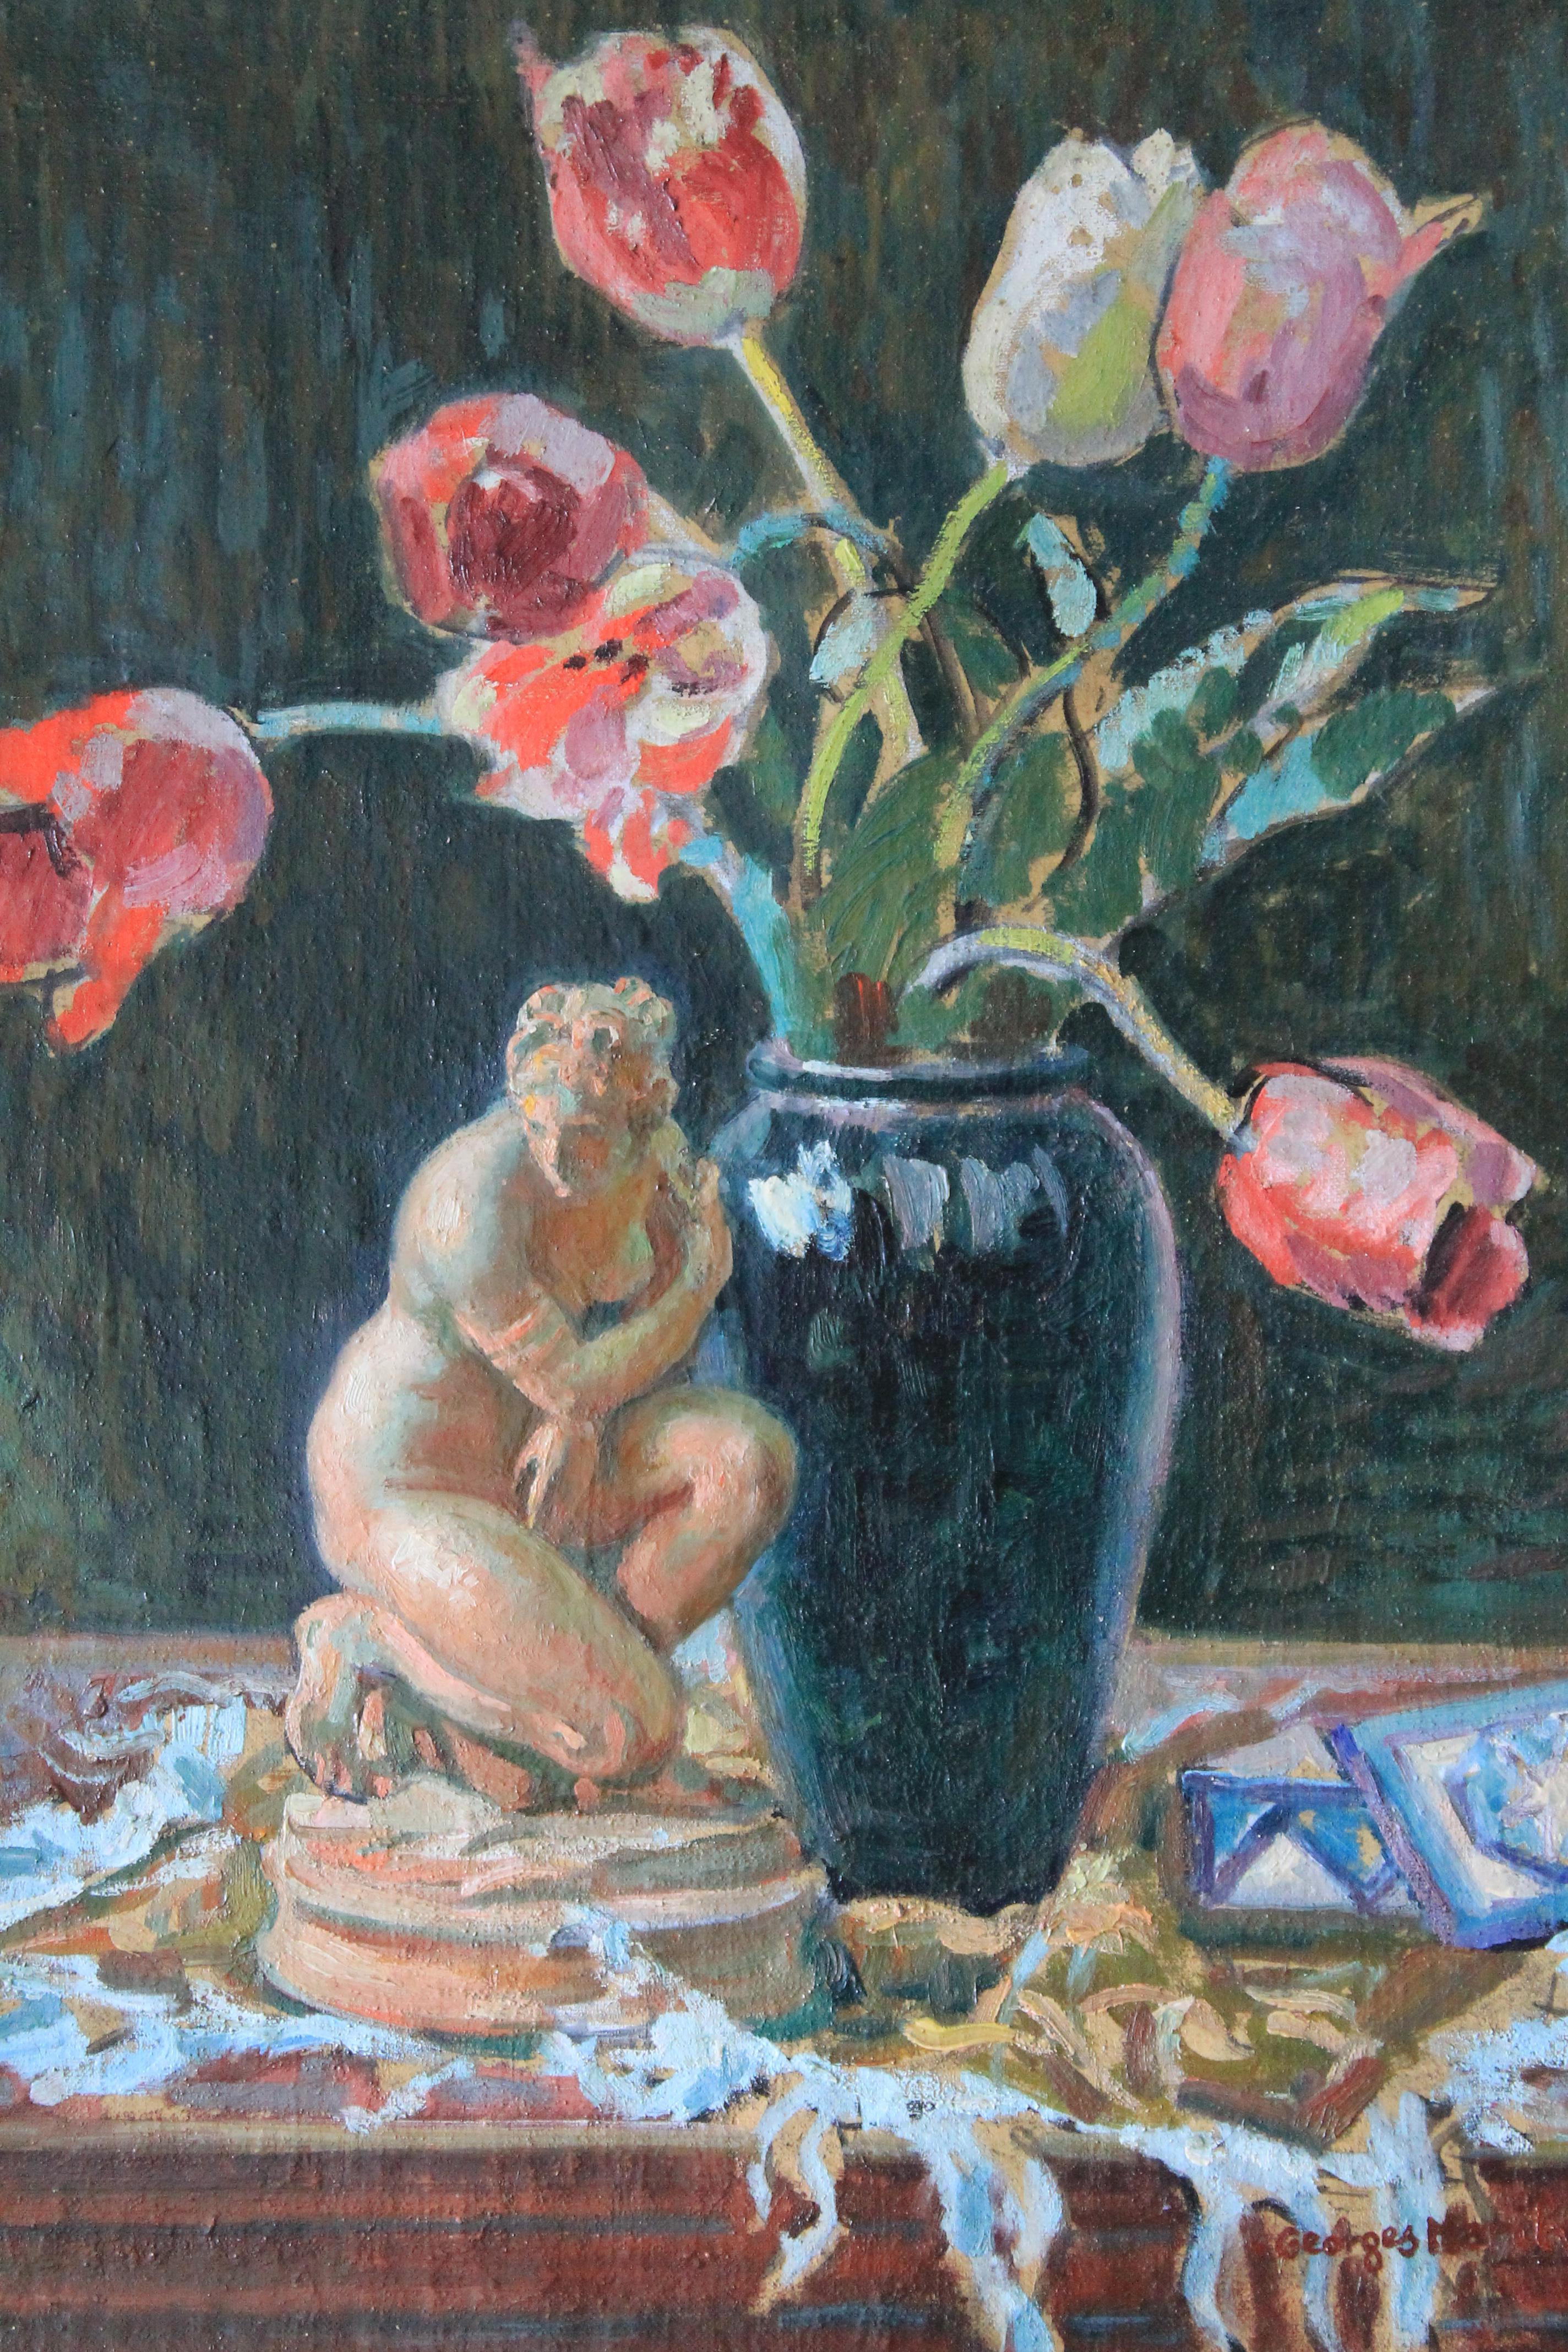 Stunning large heavy vintage oil painting of a delightful floral display with a statue on a table.  This distinctive painting is quite unusual.  The canvas is quite thick and textured and upon it, the tulips are carved out with splashes of colour